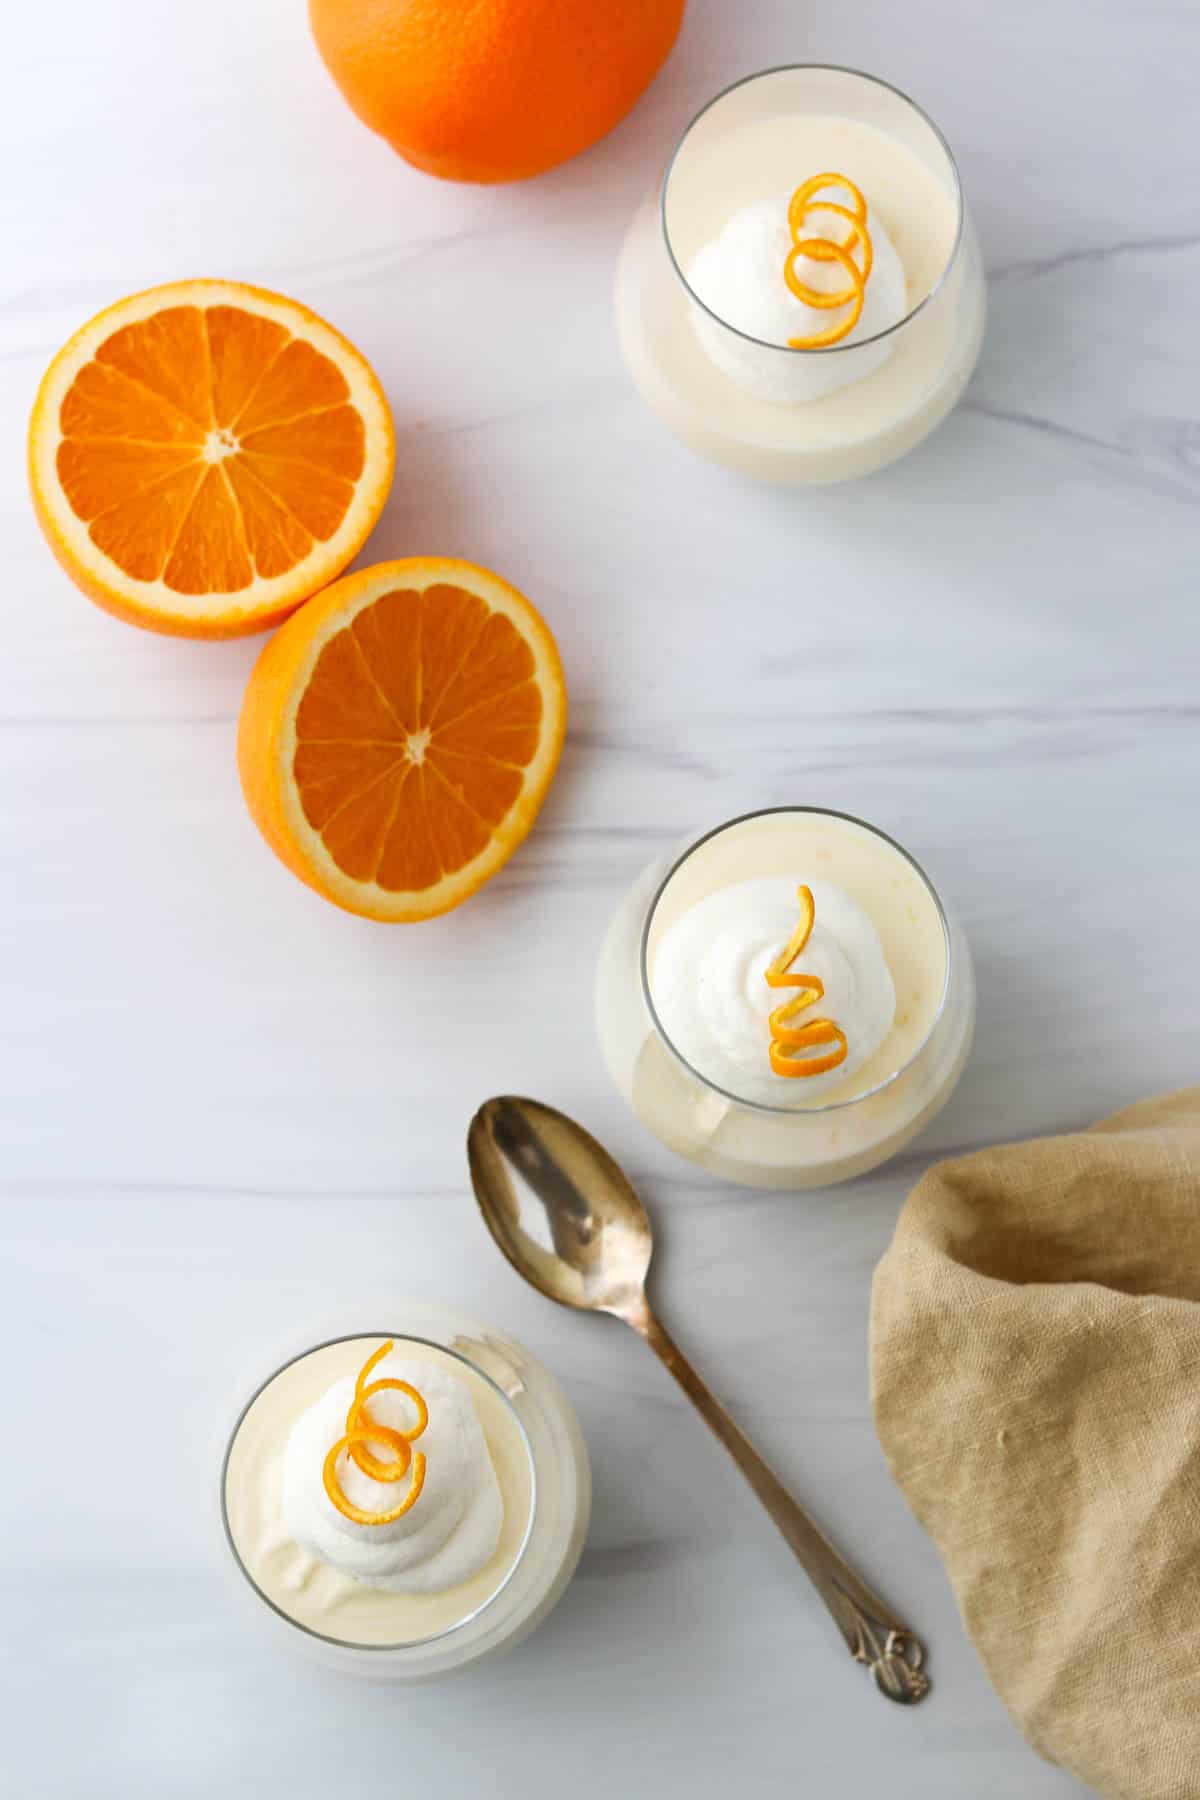 Overhead view of orange mousse and oranges next to a spoon and napkin.